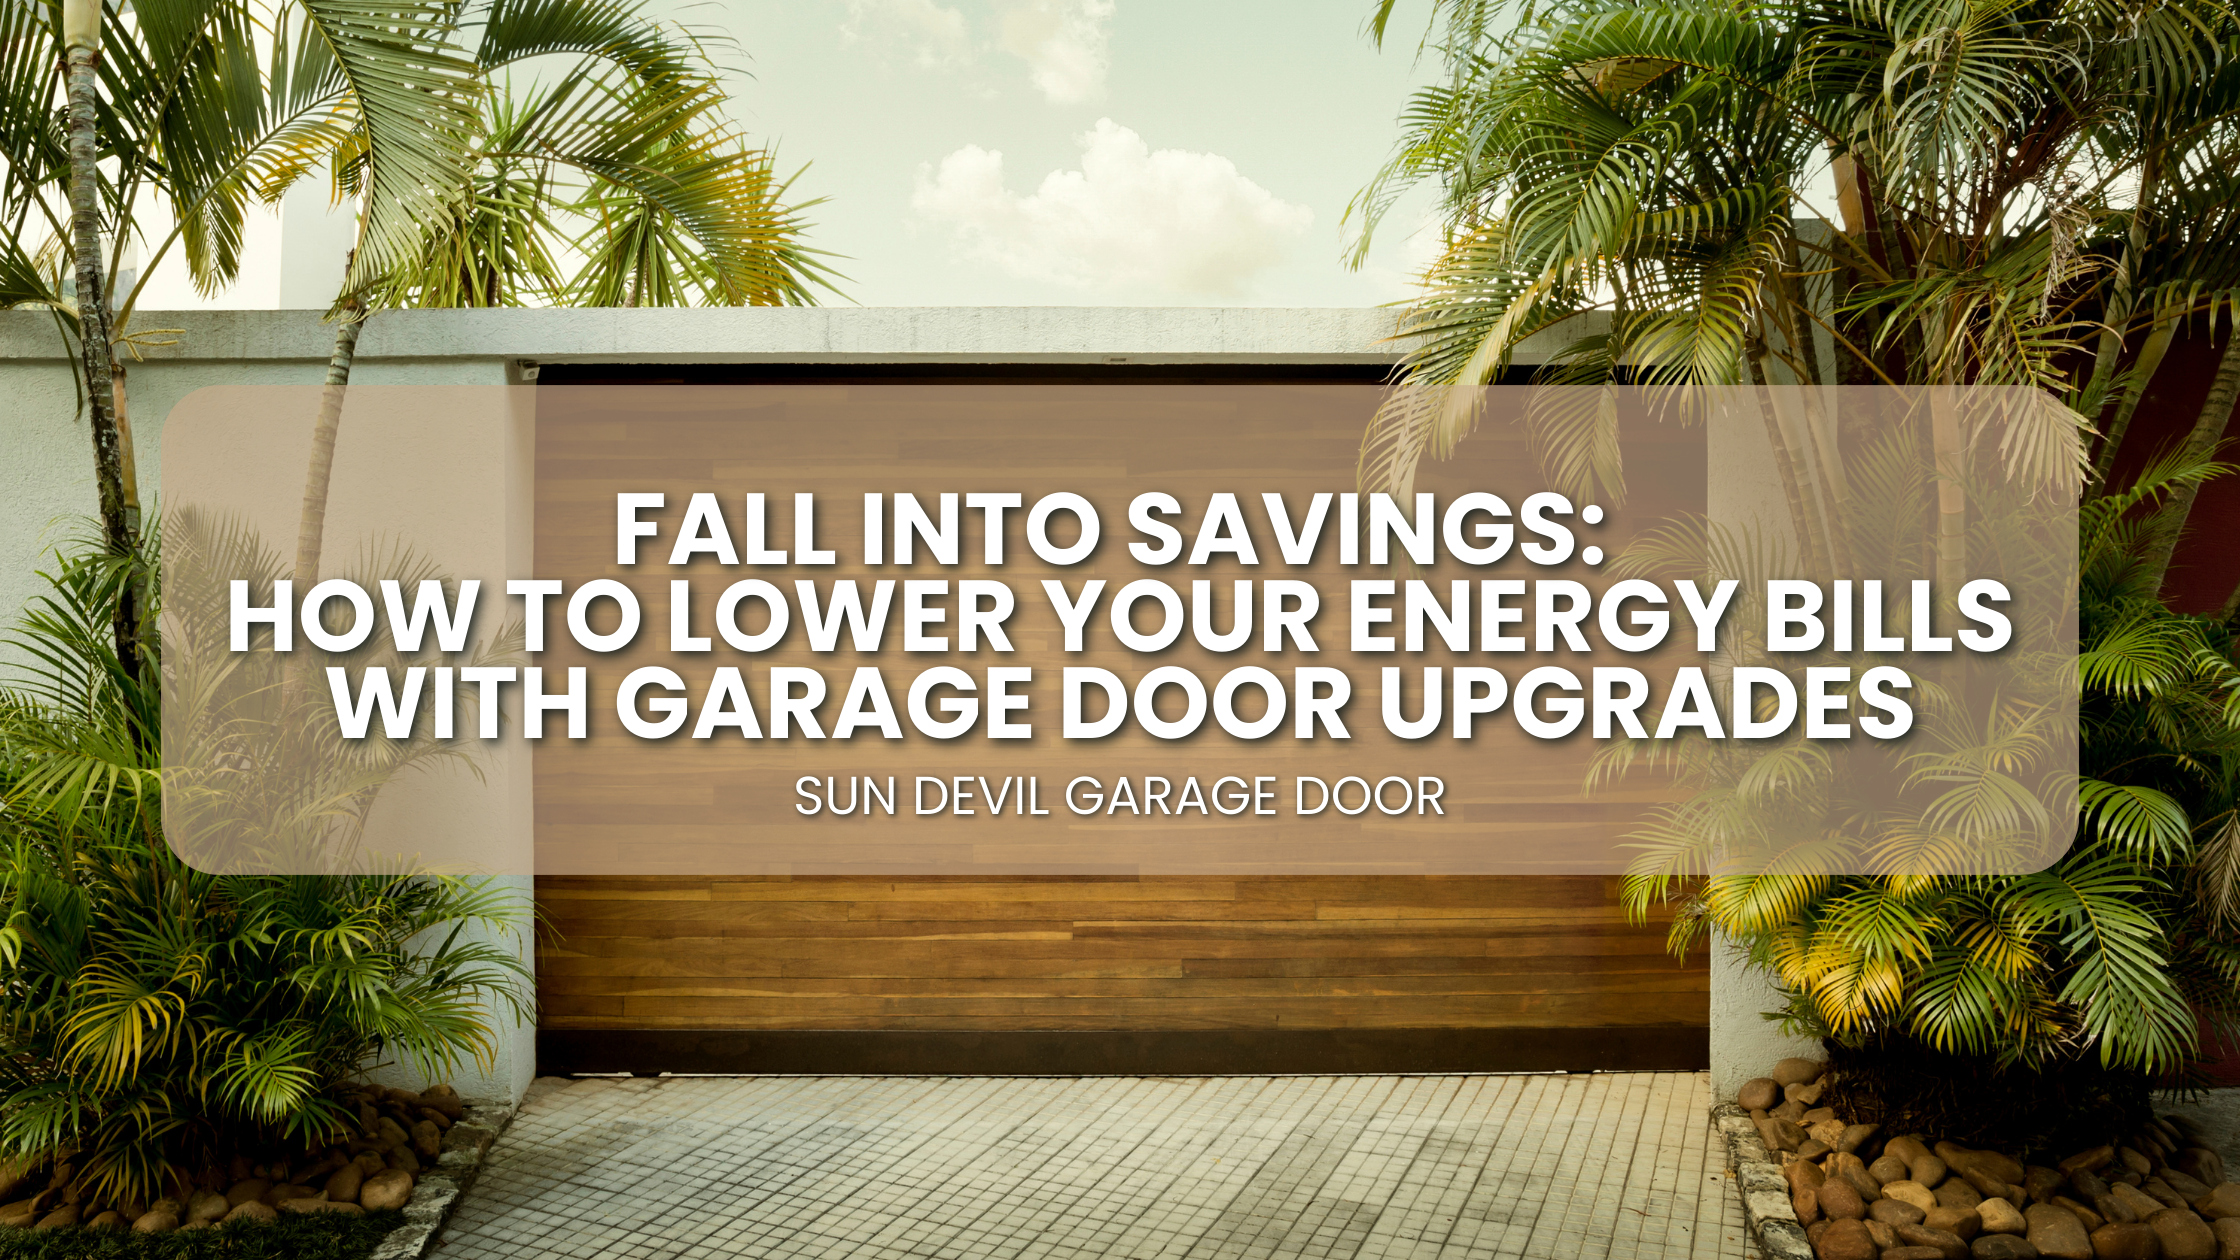 Fall into Savings: How to Lower Your Energy Bills with Garage Door Upgrades